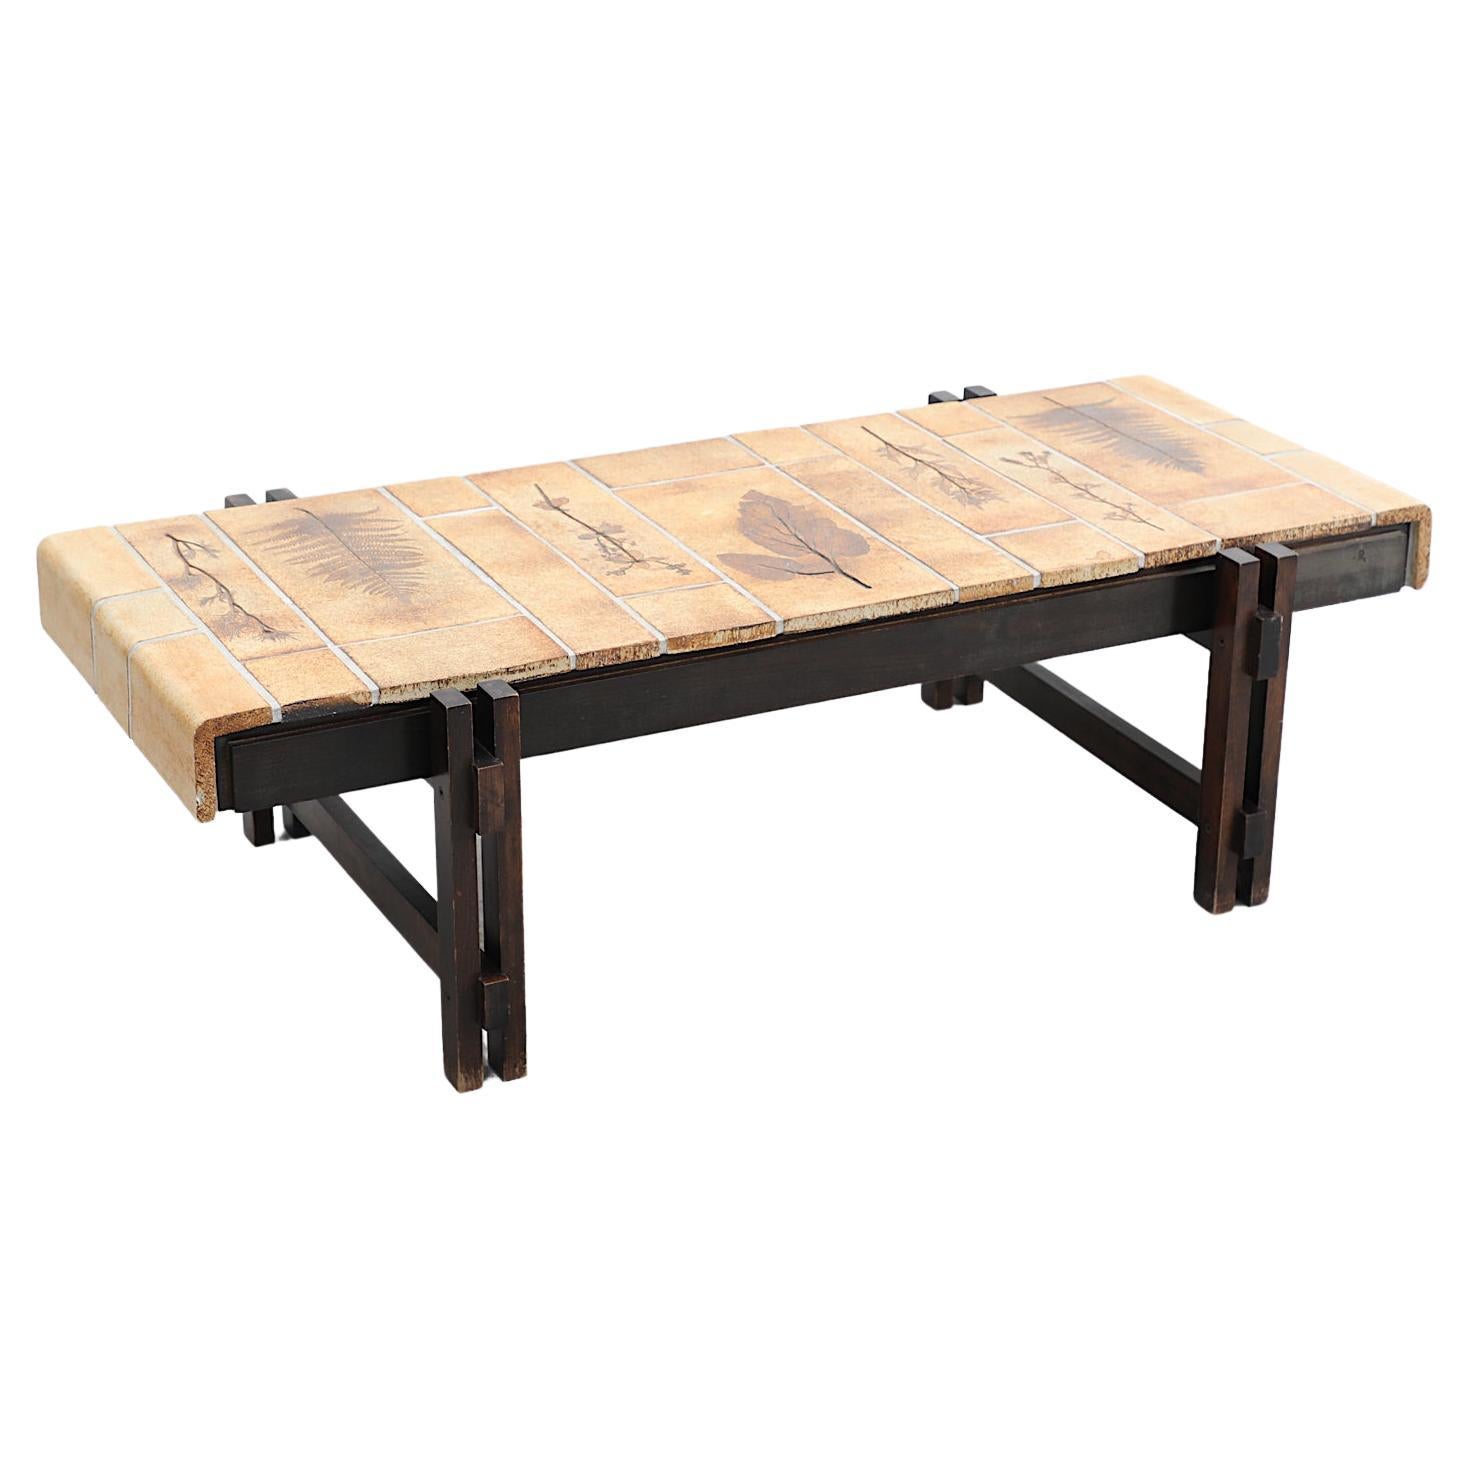 Roger Capron Rectangular 'Garrigue' Coffee Table w/ Pressed Leaf Ceramaic Tiles For Sale